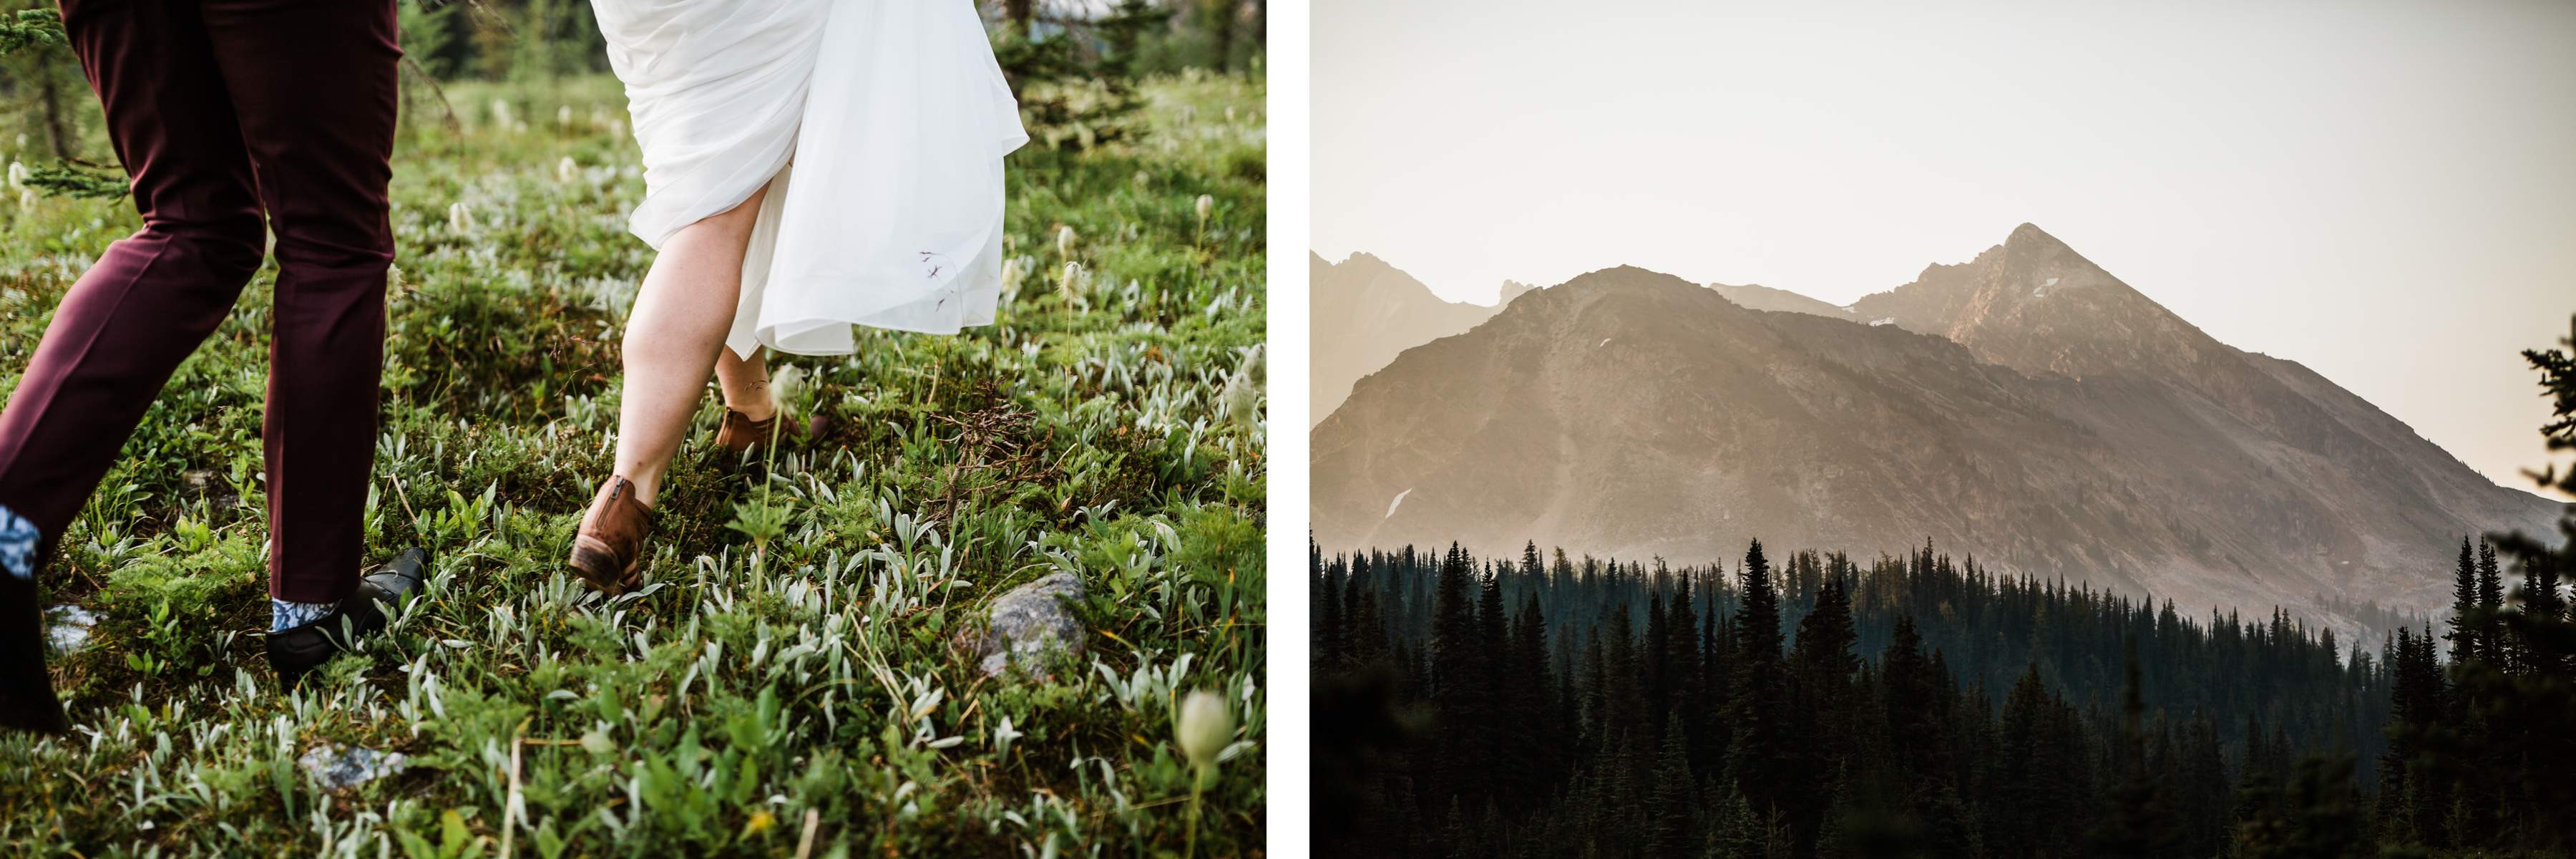 Banff Helicopter Elopement Photographers - Image 24